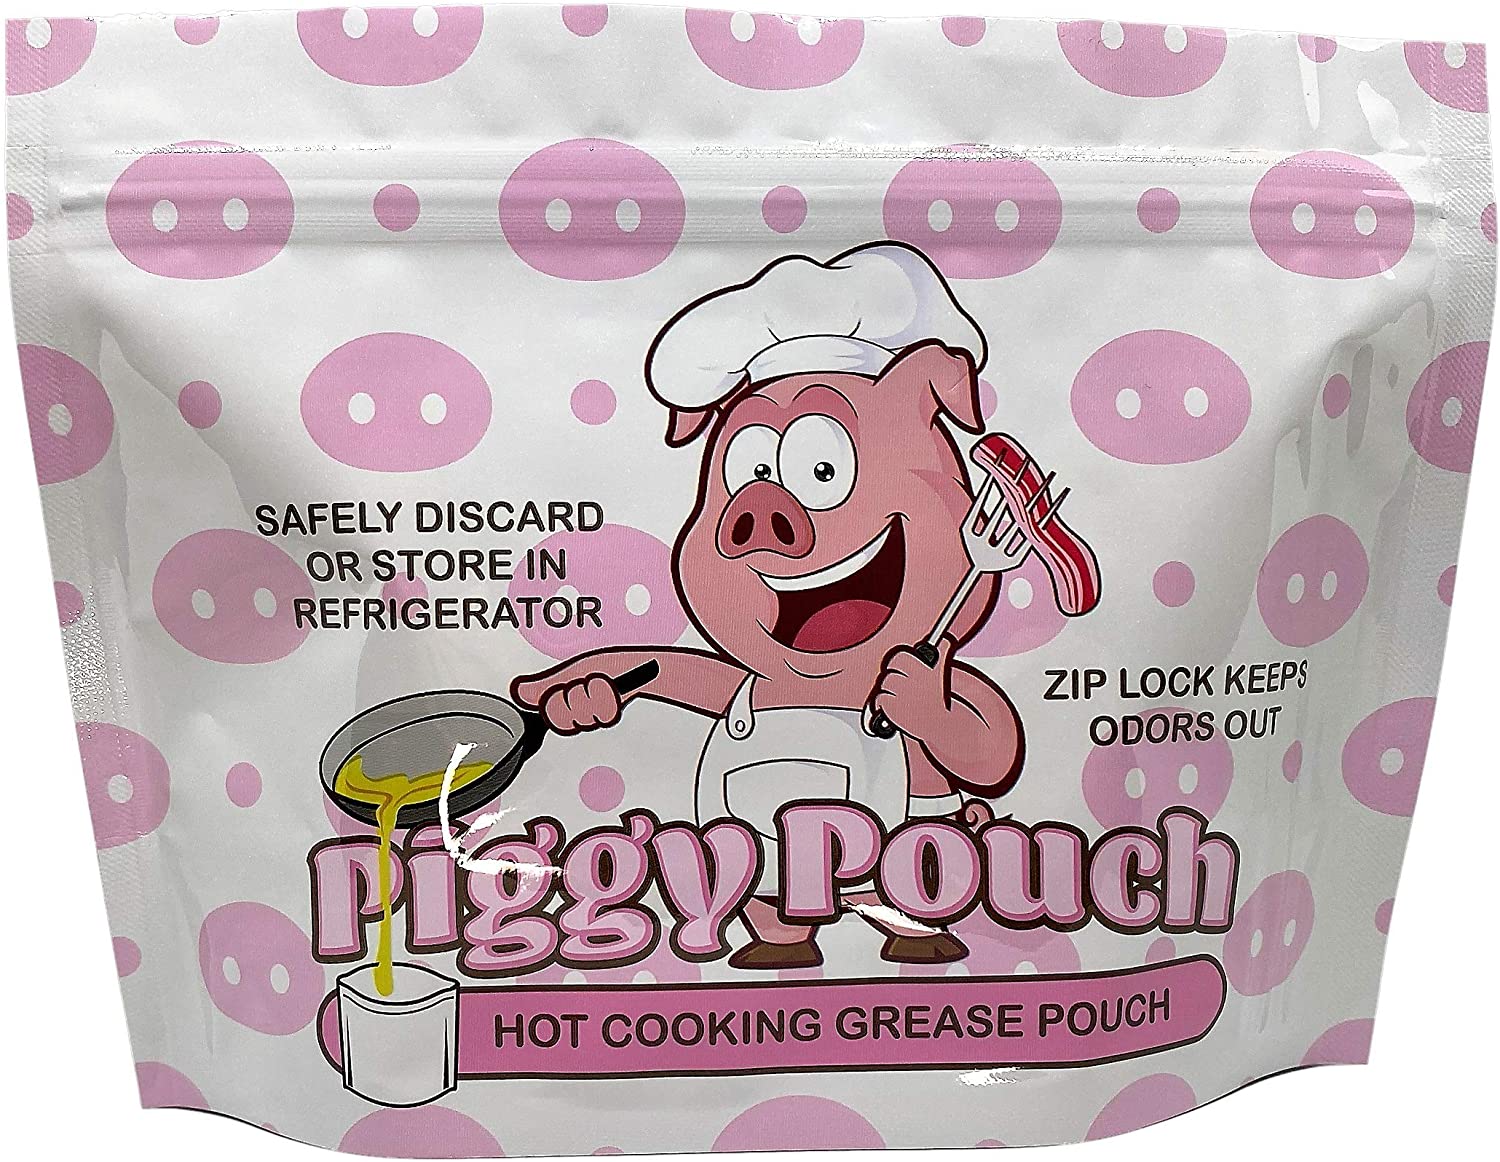 Piggy Pouch - Touchup Cup Product - Touchupcup.com